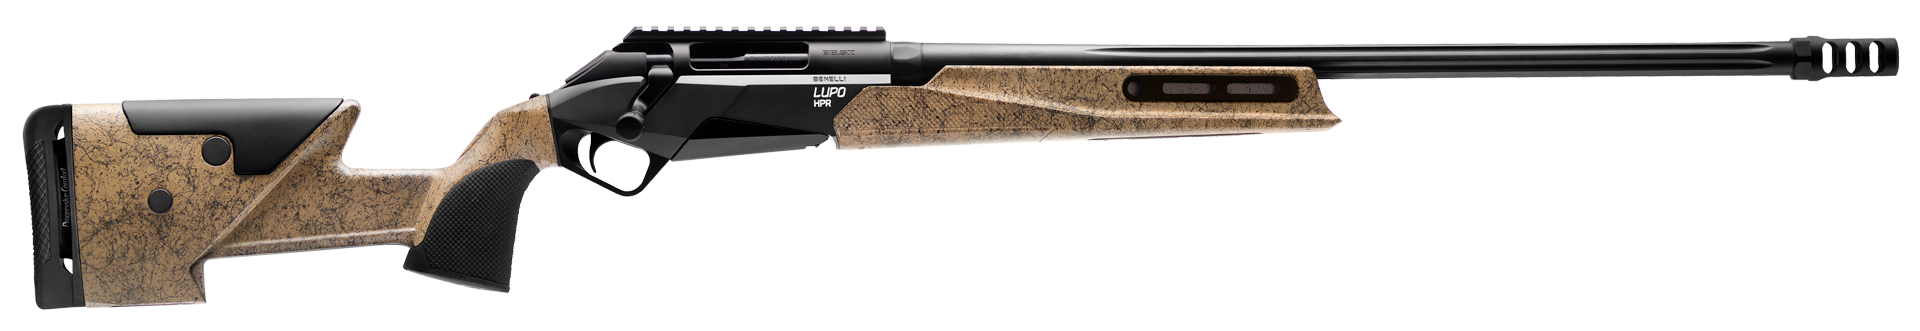 benelli-lupo-hpr-best.png